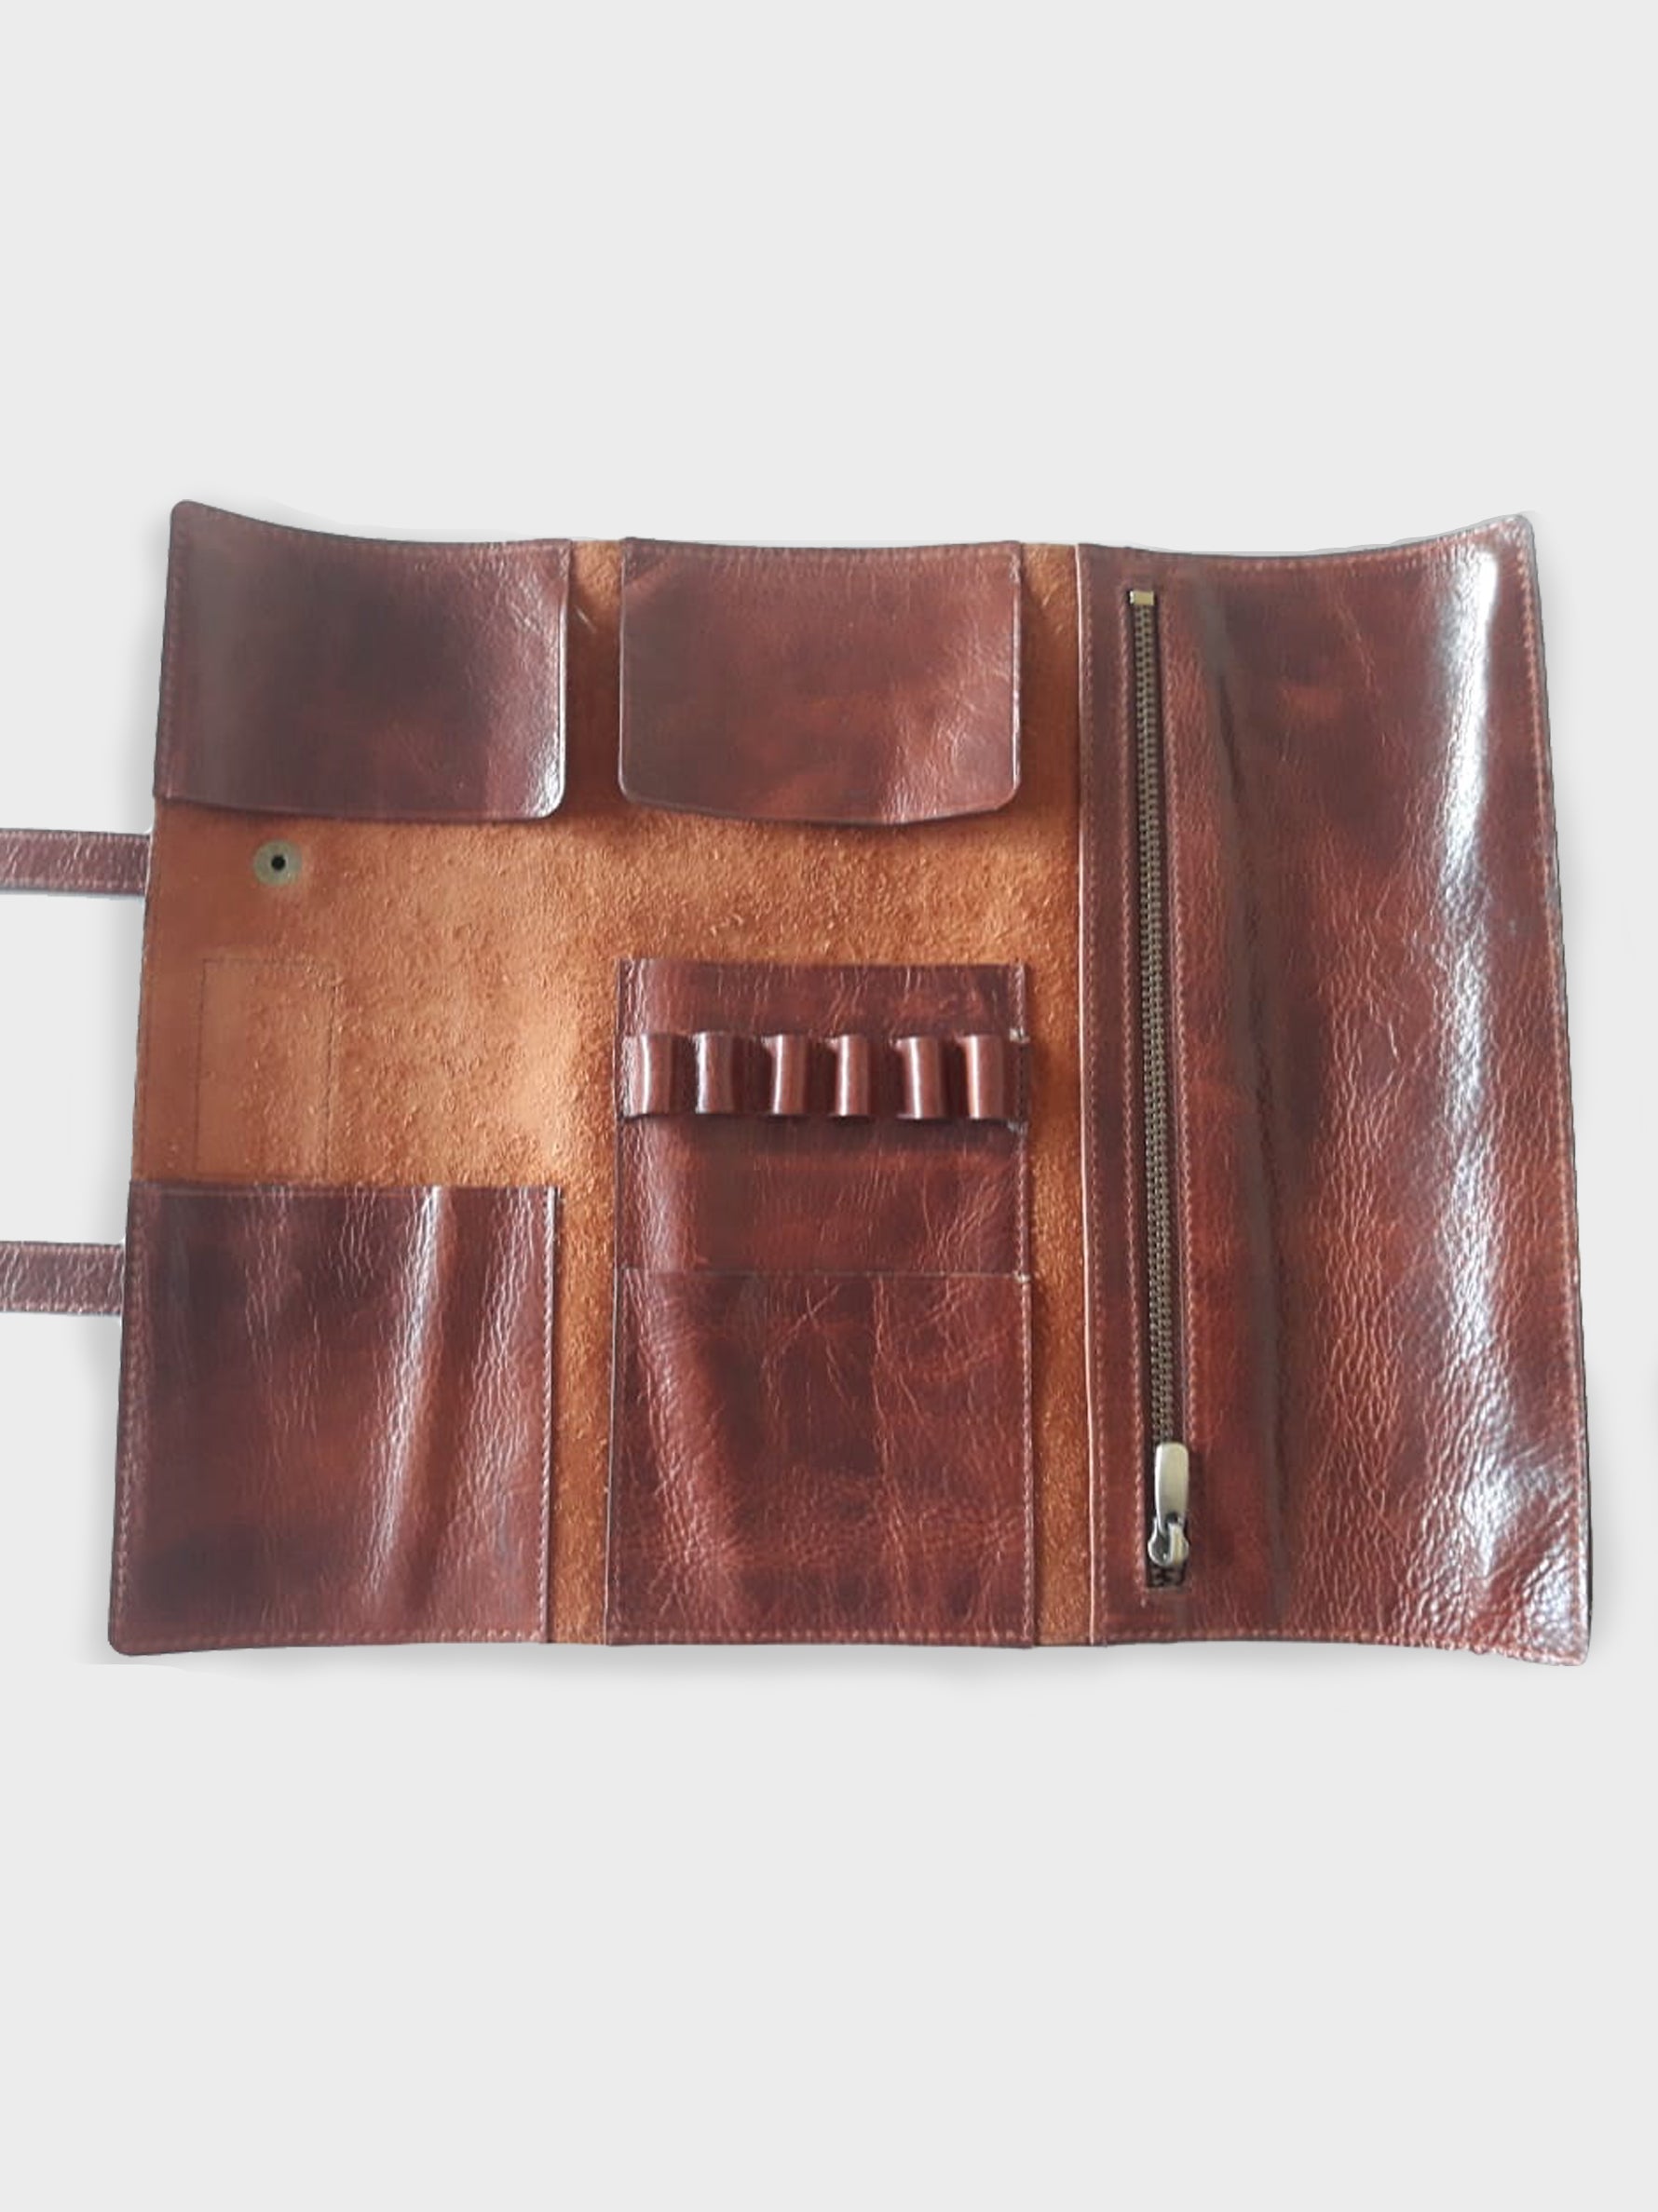 Handcrafted Genuine Vegetable Tanned Leather Artist's Roll Vintage Brown for Men & Women Tan & Loom